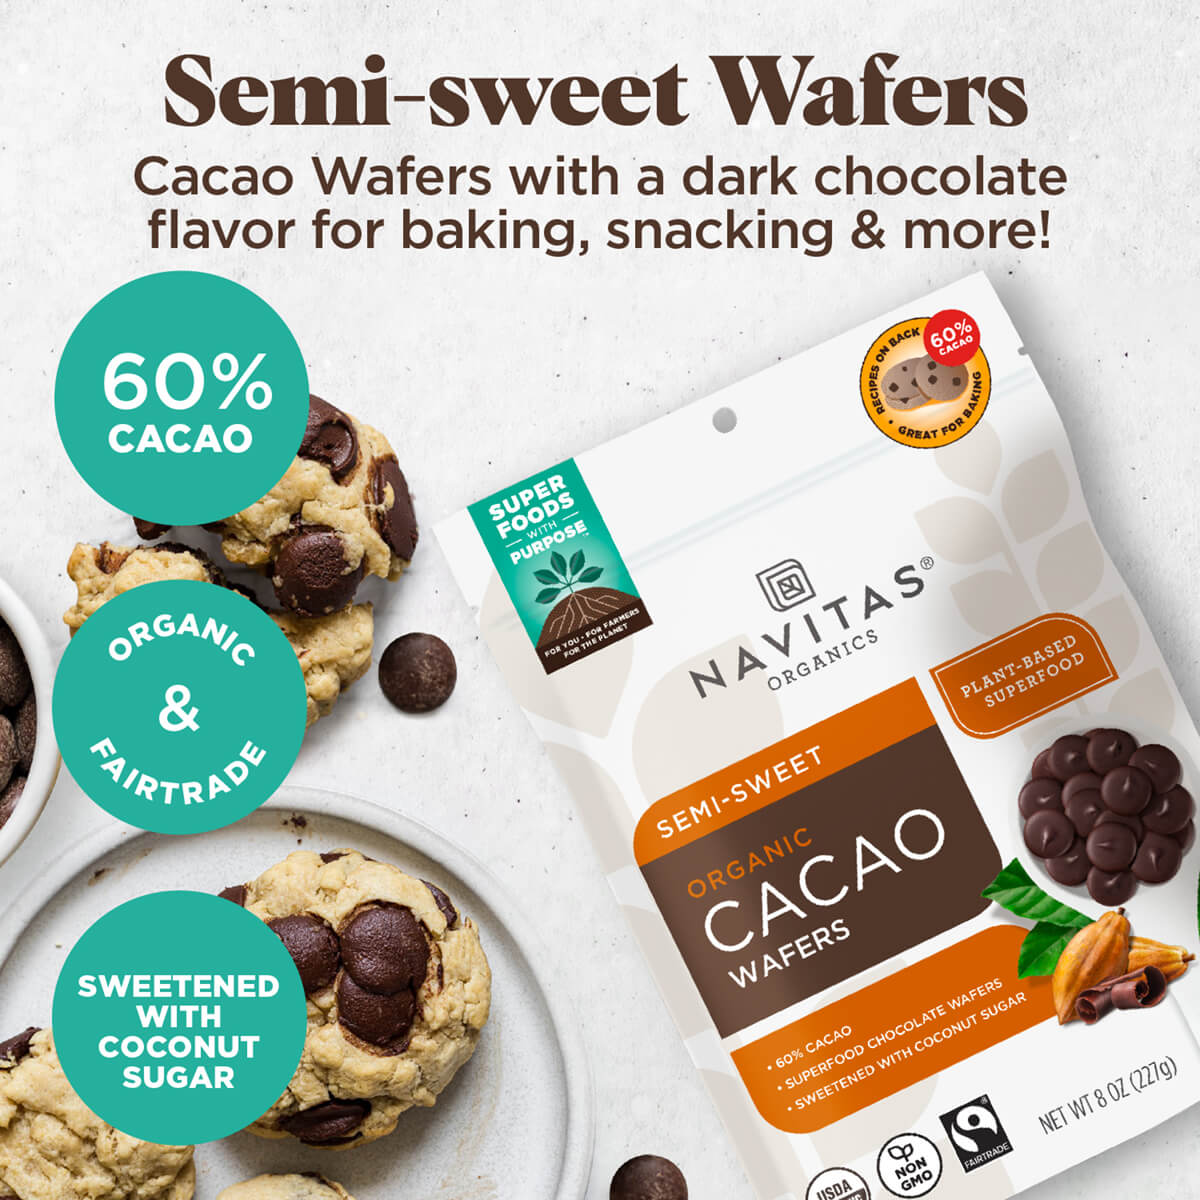 Semi-sweet wafers are Cacao Wafers with a dark chocolate flavor for baking, snacking & more! 60% cacao, organic & Fairtrade, sweetened with coconut sugar.